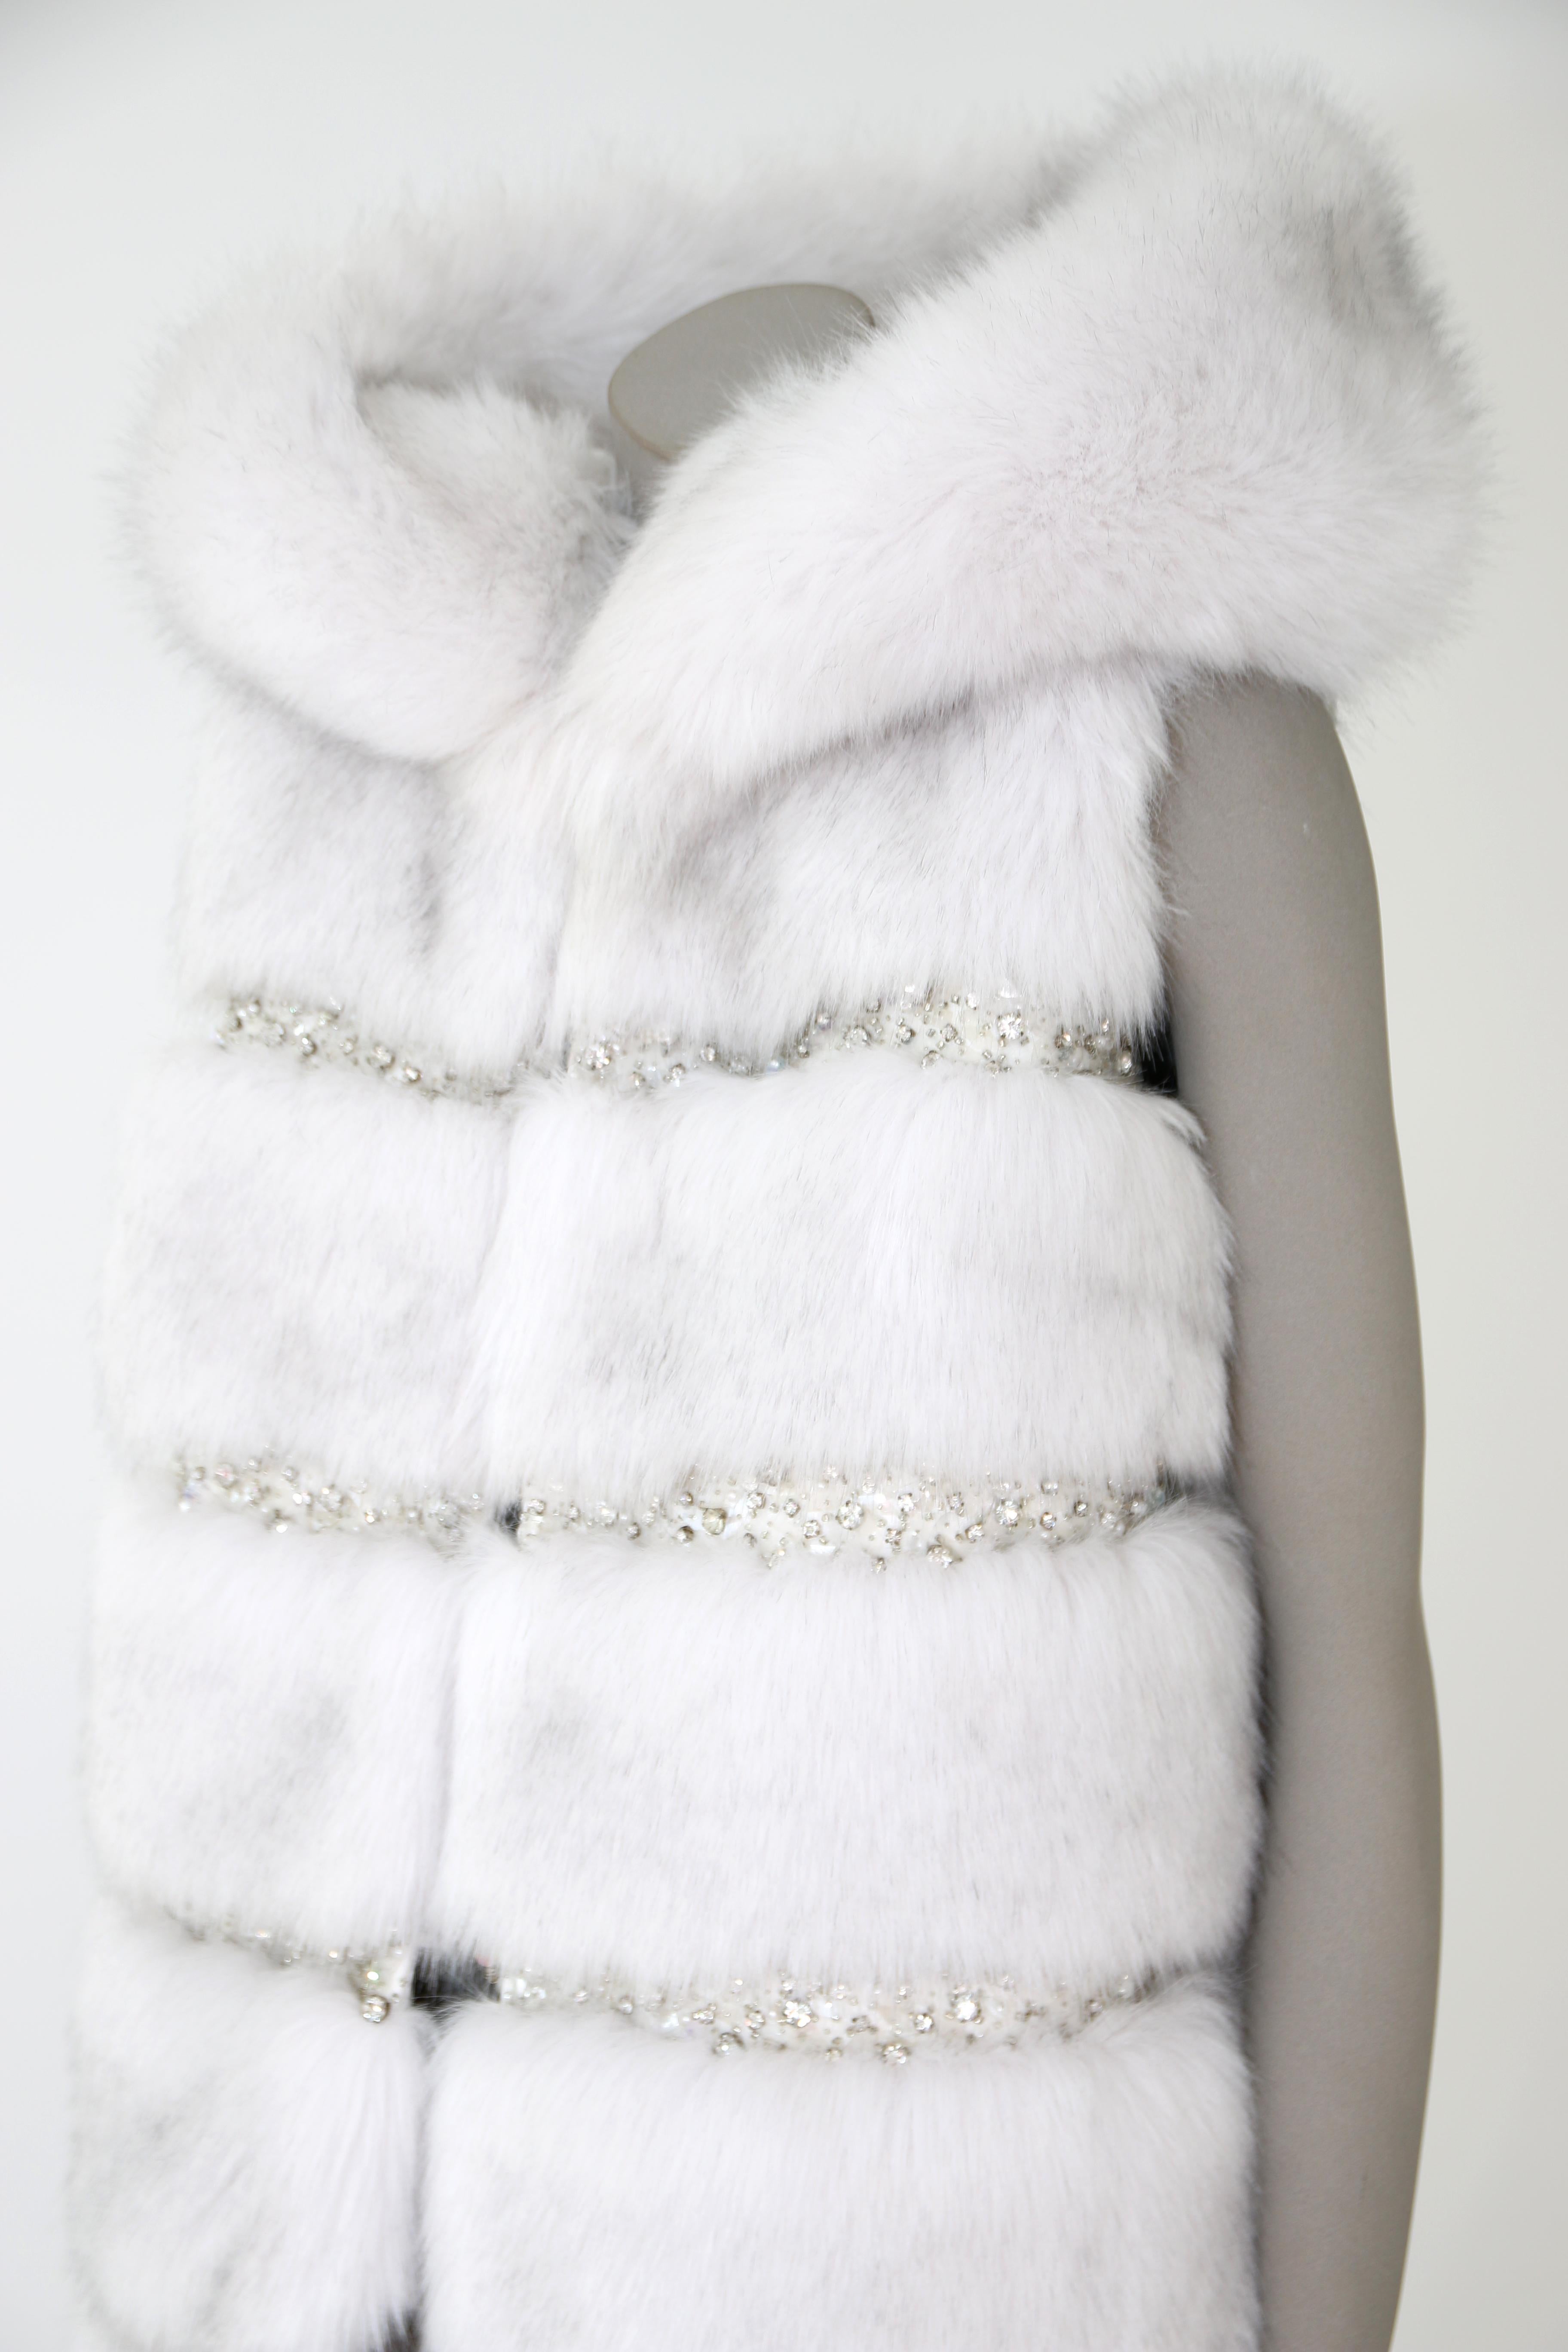 Pelush White Faux Fur Fox Vest With Crystal Embroidery And Detachable Hood - S In New Condition For Sale In Greenwich, CT